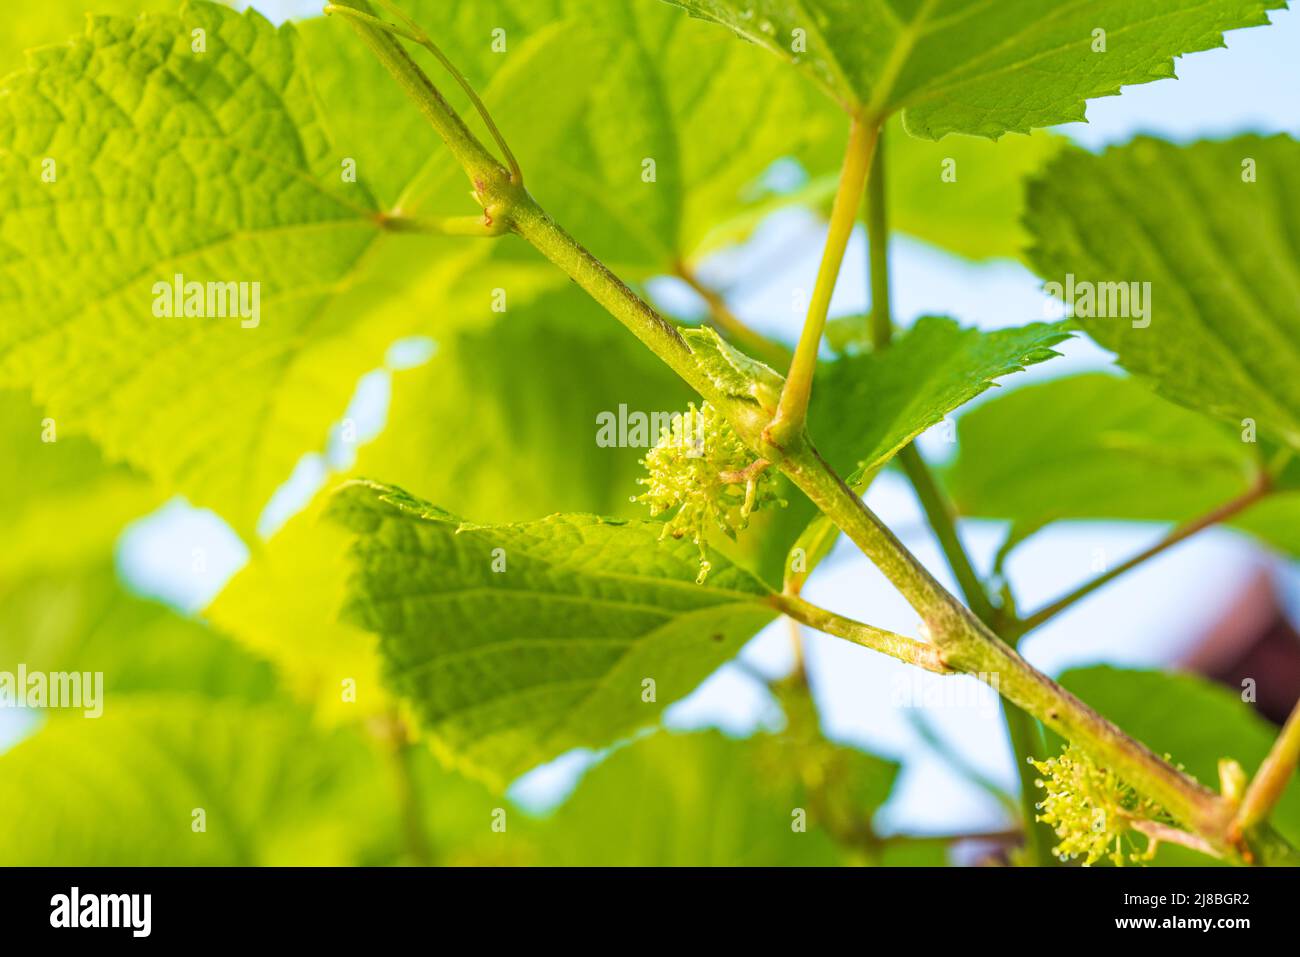 not stretching the inflorescence,Flowering vine on the way to grape. Stock Photo